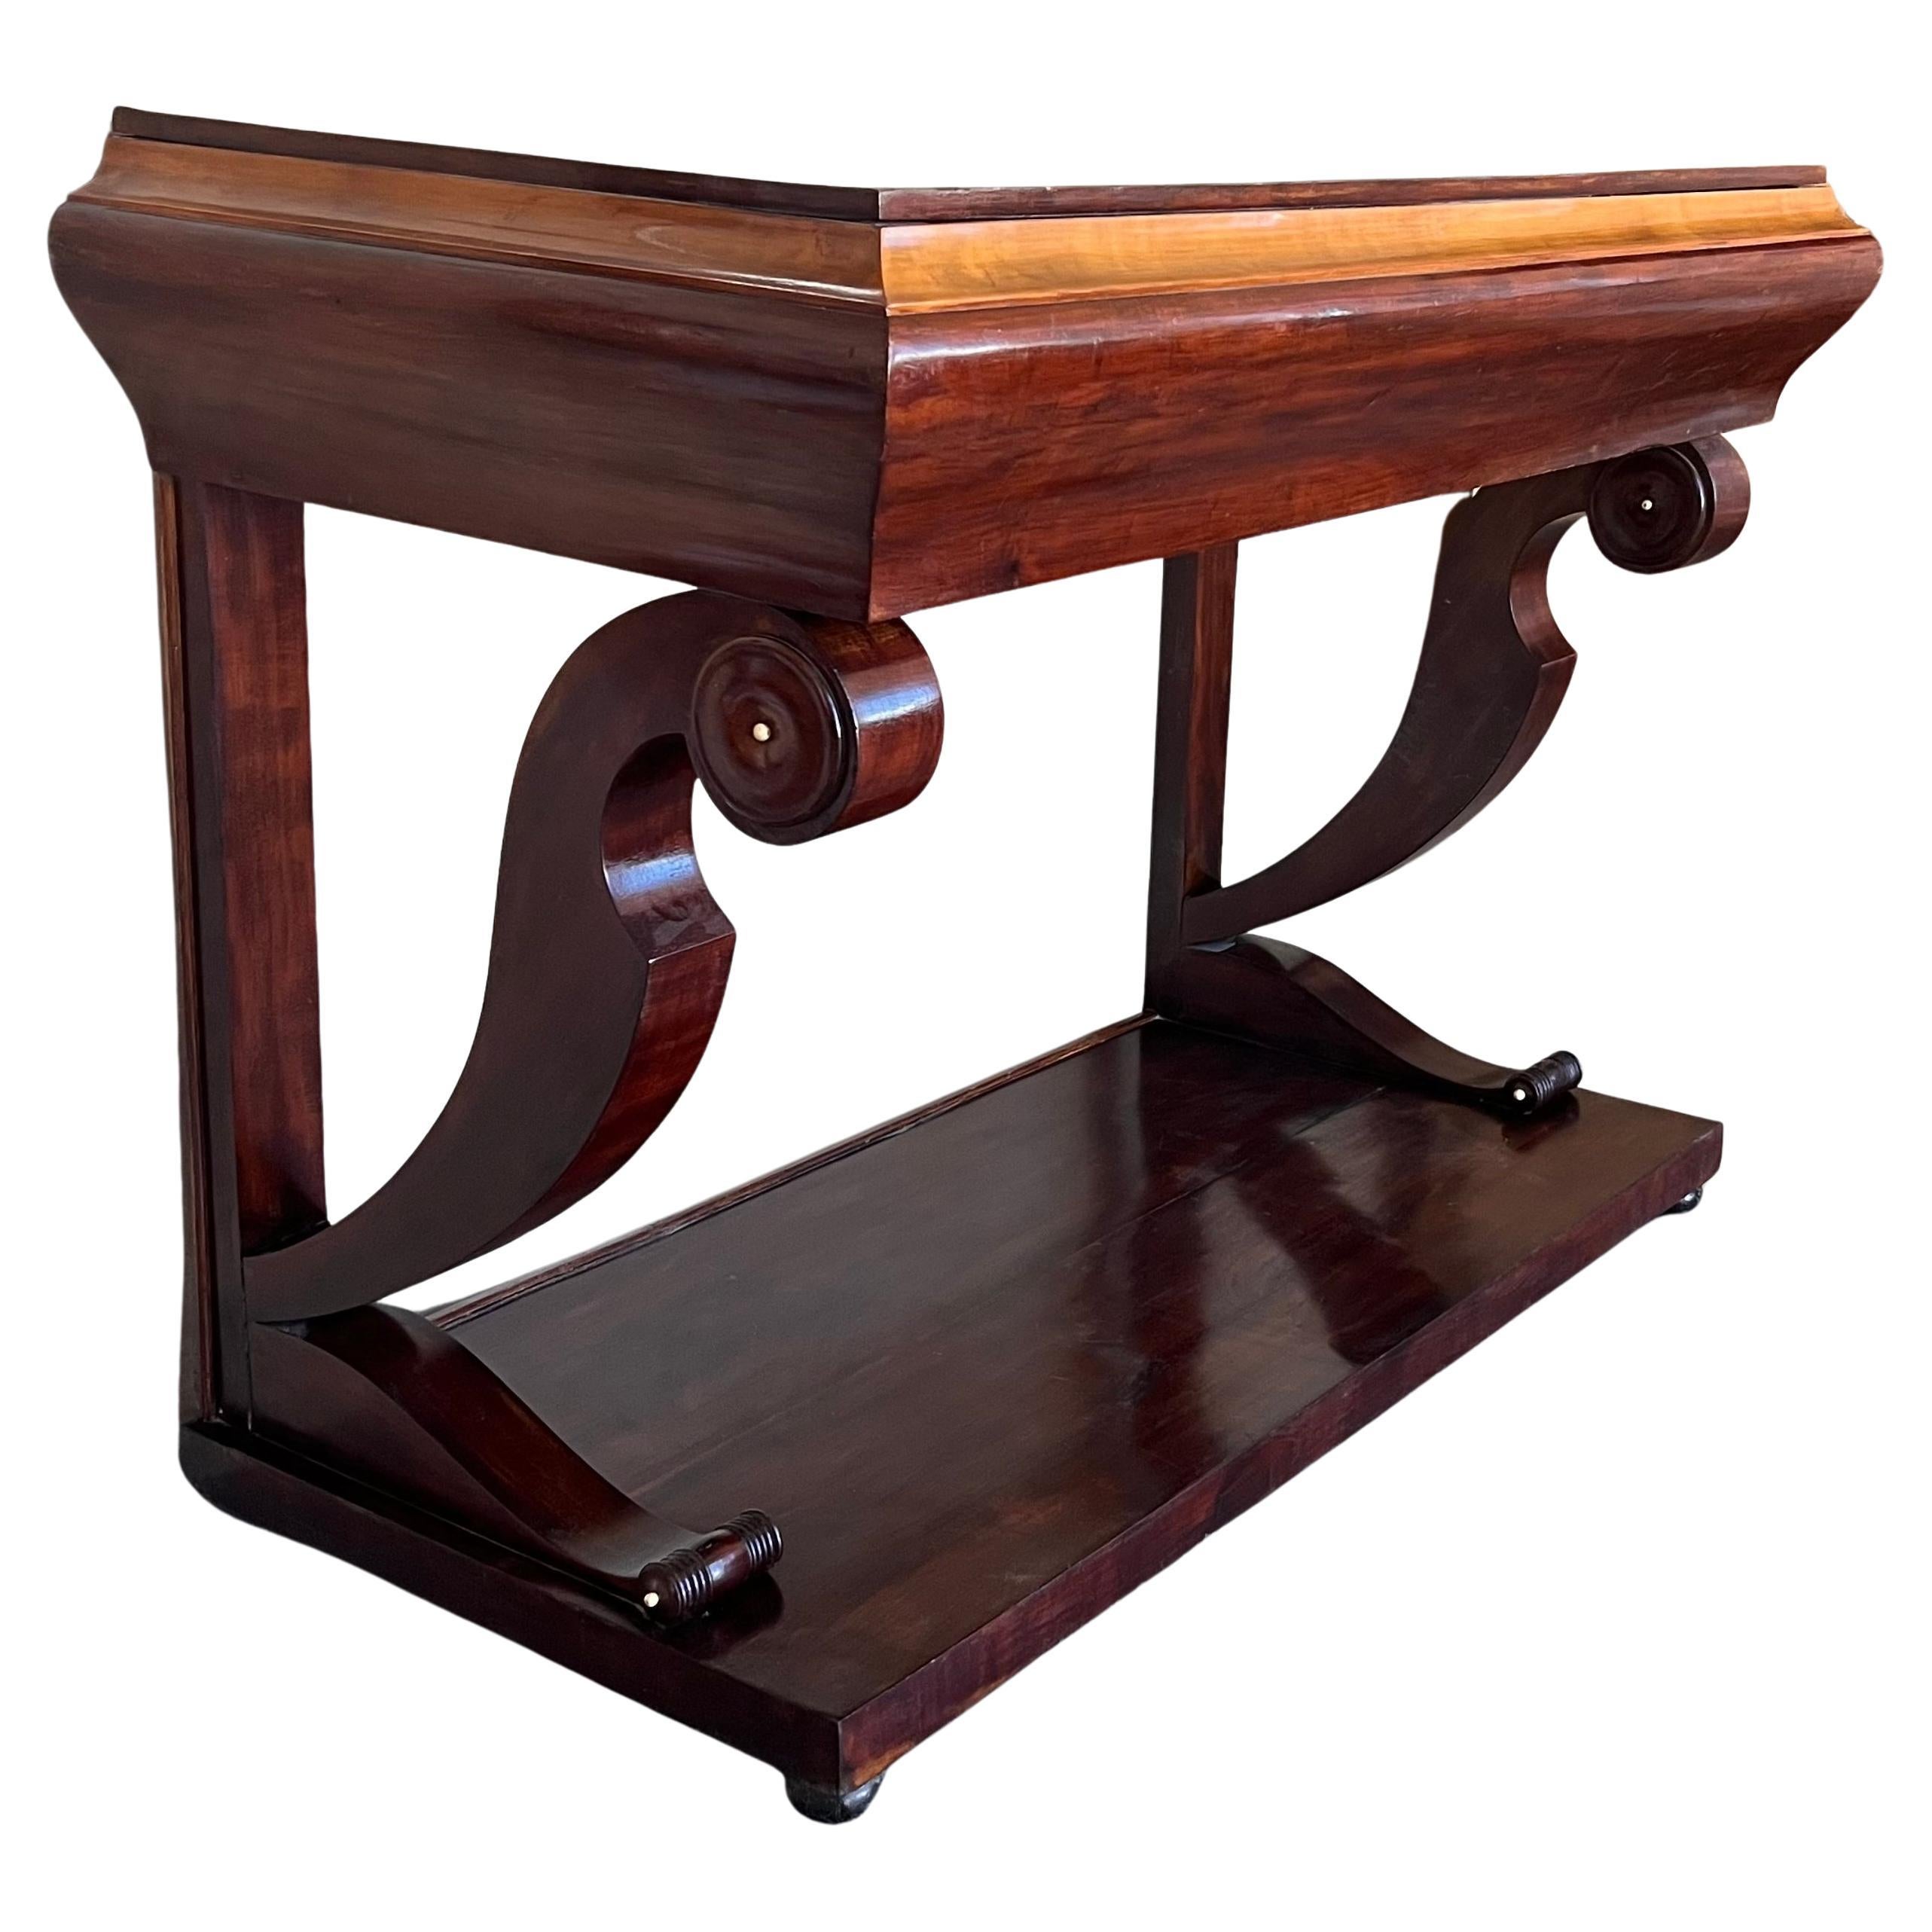 Absolute unique walnut wall console table artfully made in the early Biedermeier period circa 1830 in Austria. Made with mahogany veneer with its fantastic processed S-shaped legs. The amazing mirror-matched veneer work is highlighted by fine maple